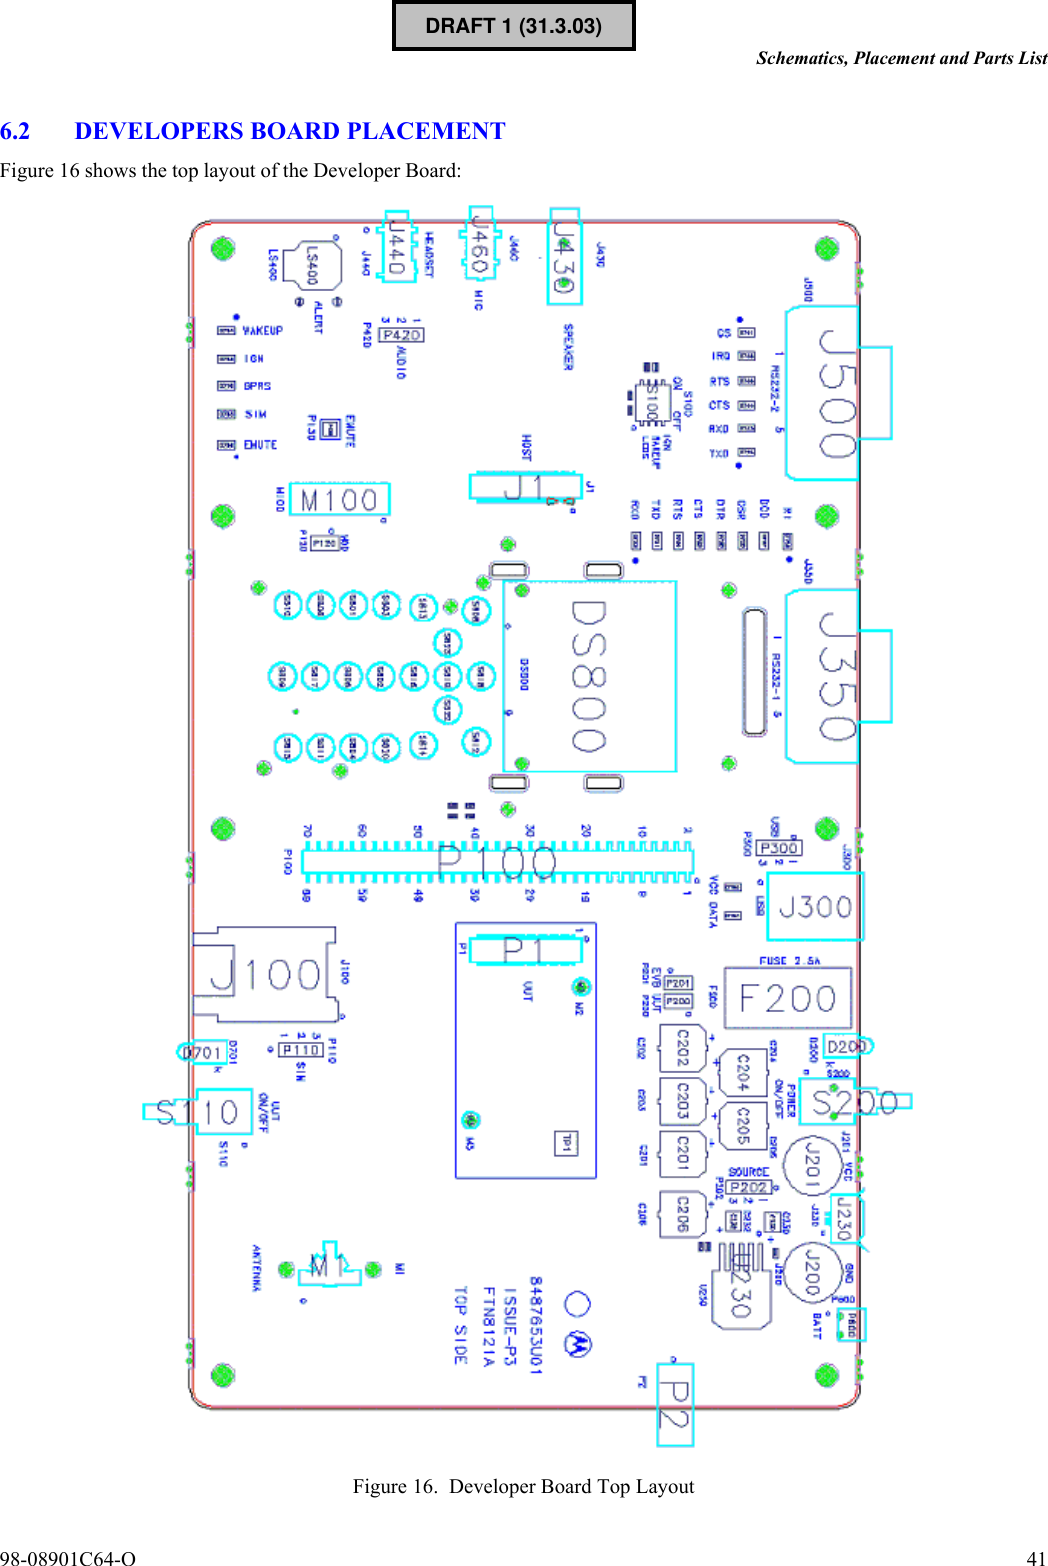 98-08901C64-O 41Schematics, Placement and Parts List6.2 DEVELOPERS BOARD PLACEMENTFigure 16 shows the top layout of the Developer Board: Figure 16. Developer Board Top LayoutDRAFT 1 (31.3.03)